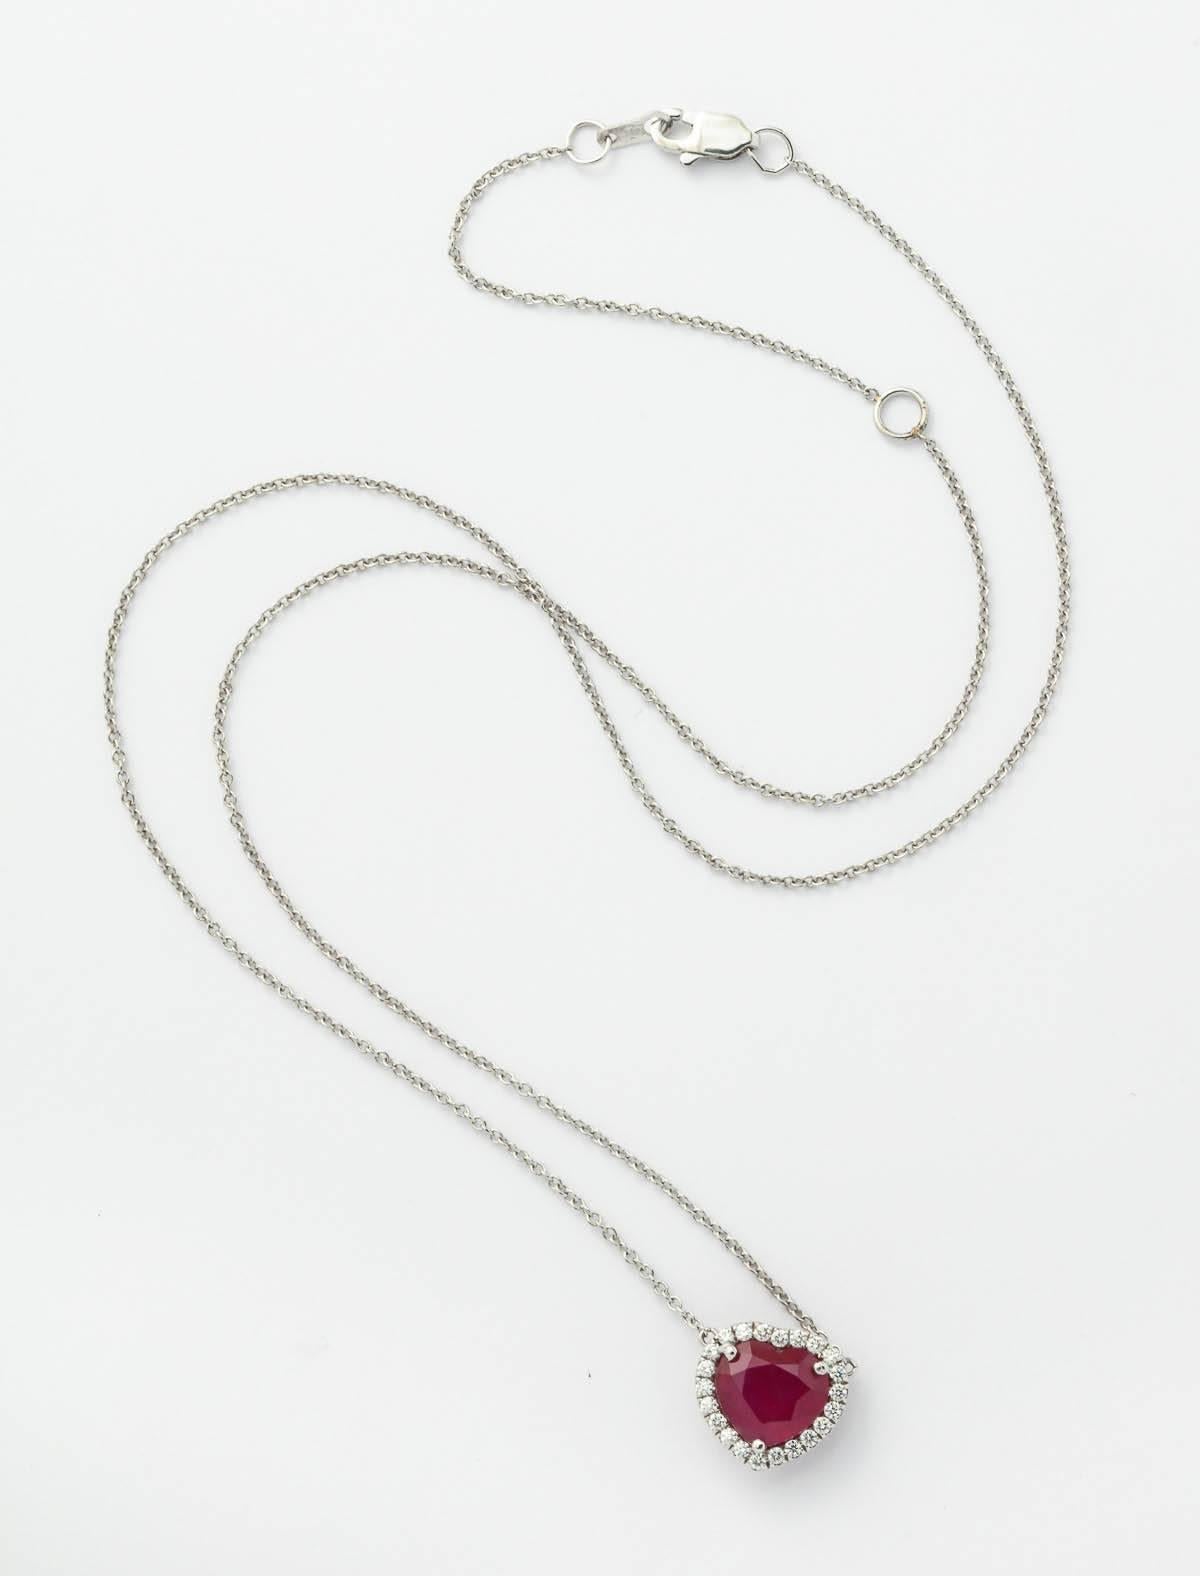 18k white gold heart shape Burmese ruby and diamond necklace 
Center Burmese ruby 2.12 ct. surrounded by 22 full cut round diamonds weighing 0.15 ct. total weight
18k, 18" adjustable cable link chain

AGL report #CS36208
